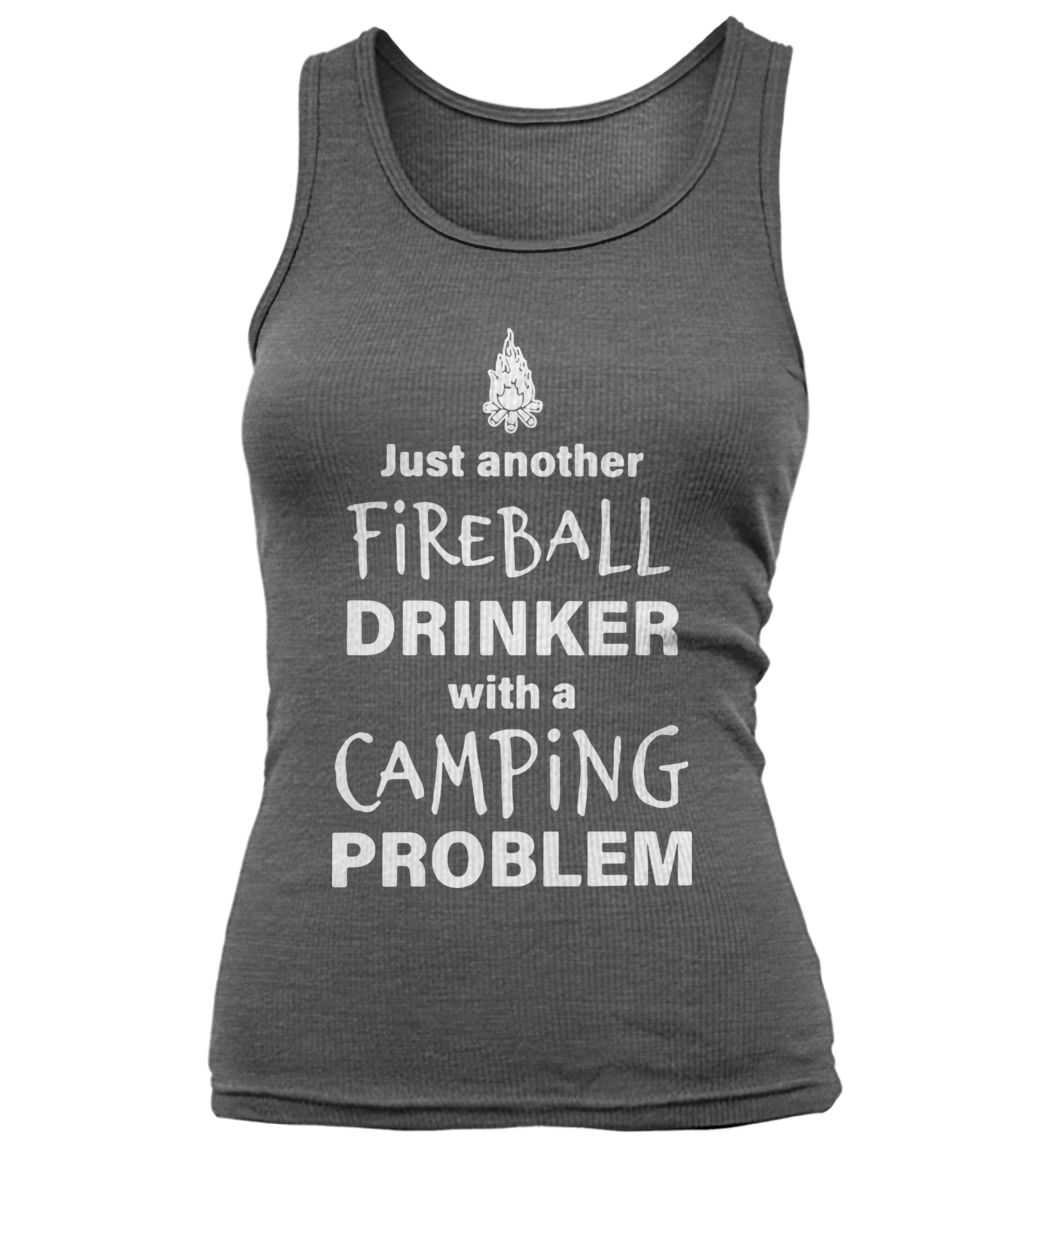 Just another fireball drinker with a camping problem women's tank top